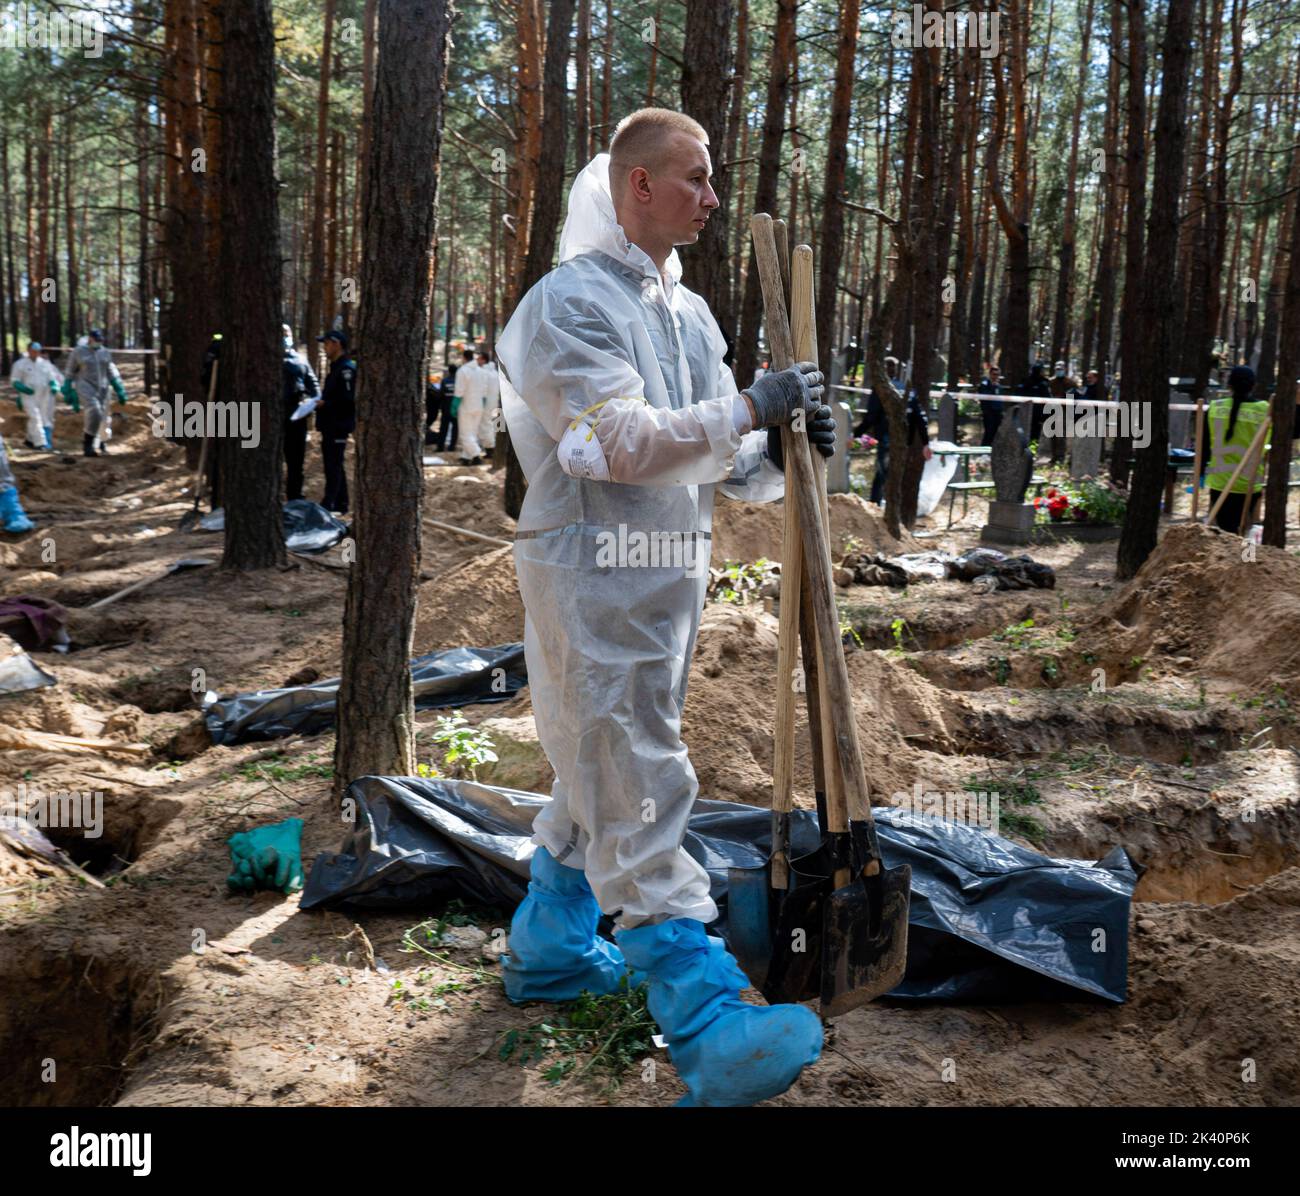 An investigator wearing protective gear is seen carrying shovels used to exhume the bodies. A mass burial site was found in the outskirt of the eastern Ukrainian city, Izyum, Kharkiv region which has been liberated from Russian occupation two weeks ago. At least 445 new graves were found in the site of an existing cemetery while many only have numbers written on the wooden cross. All bodies will be exhumed and sent for forensic examination but it was told from initial investigations that some bodies shown sign of torture. Stock Photo